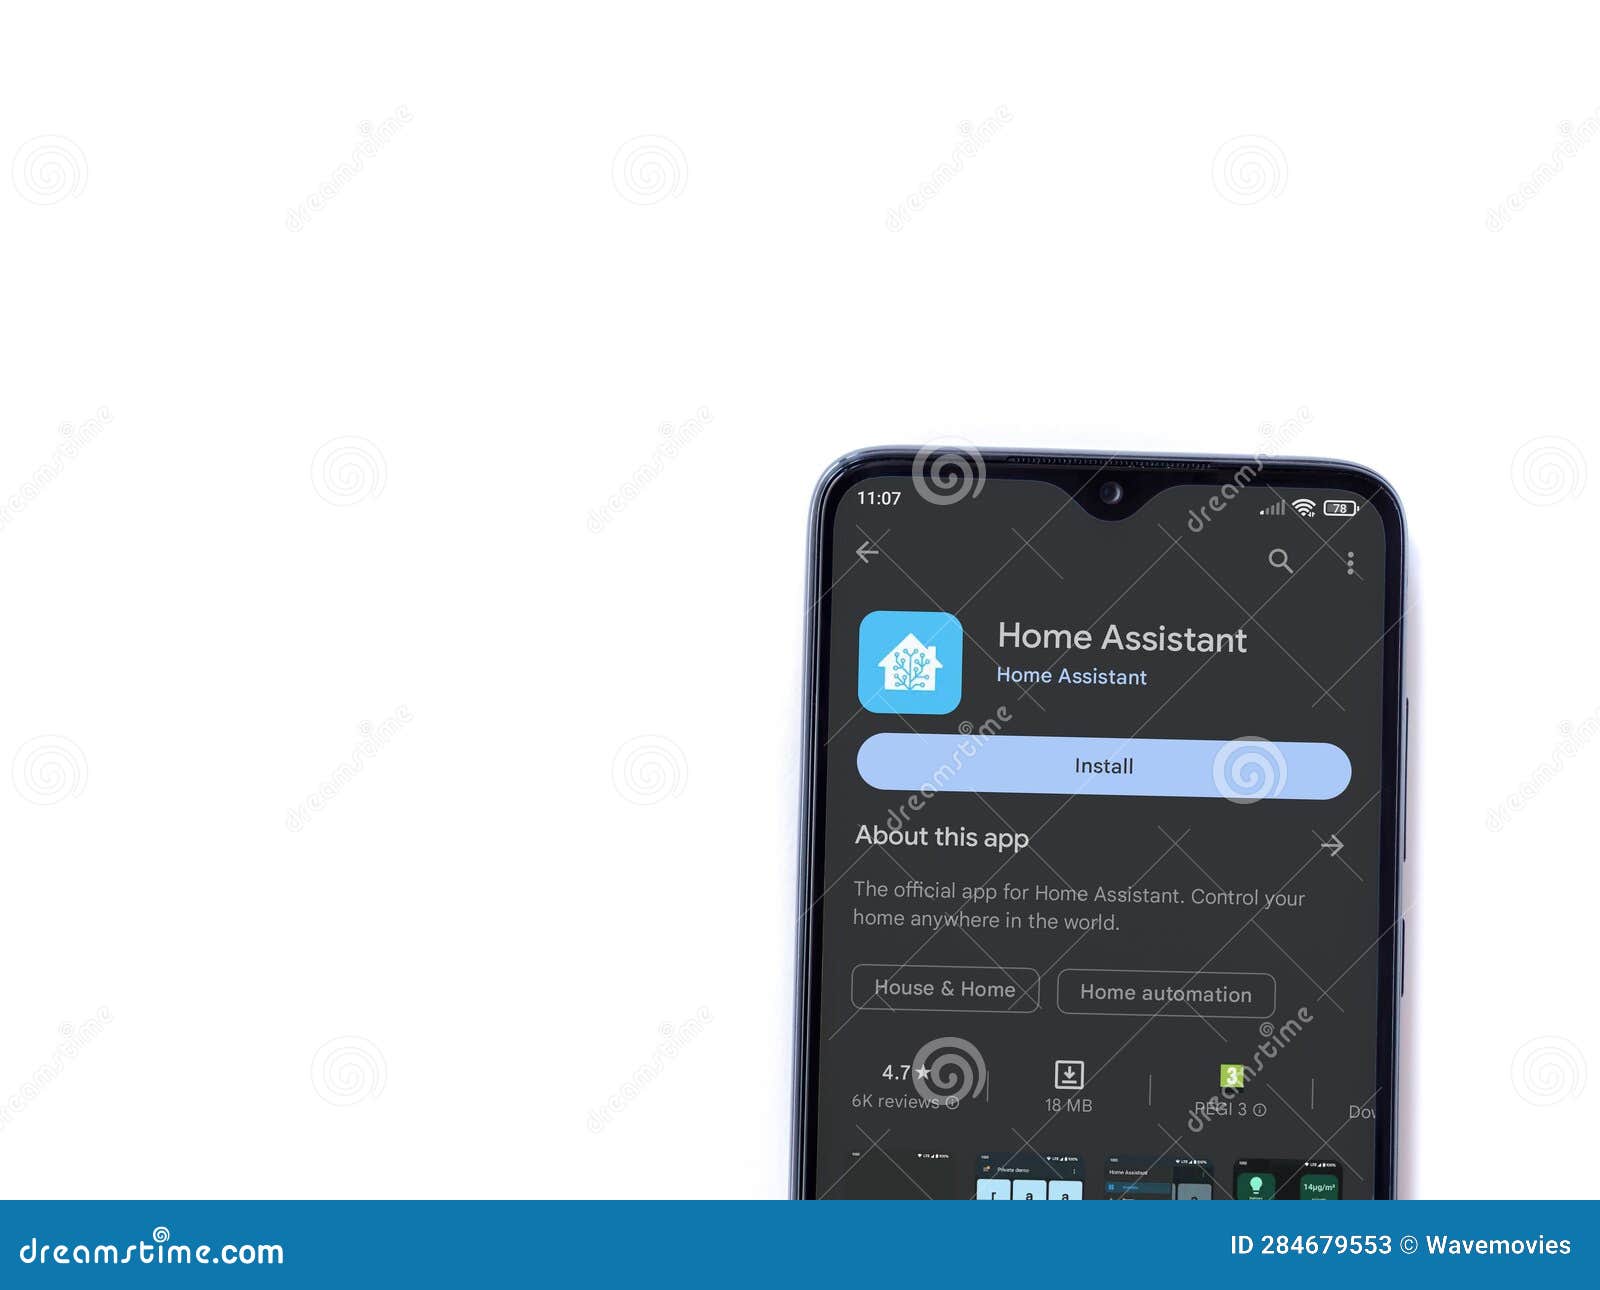 Home Assistant on the App Store